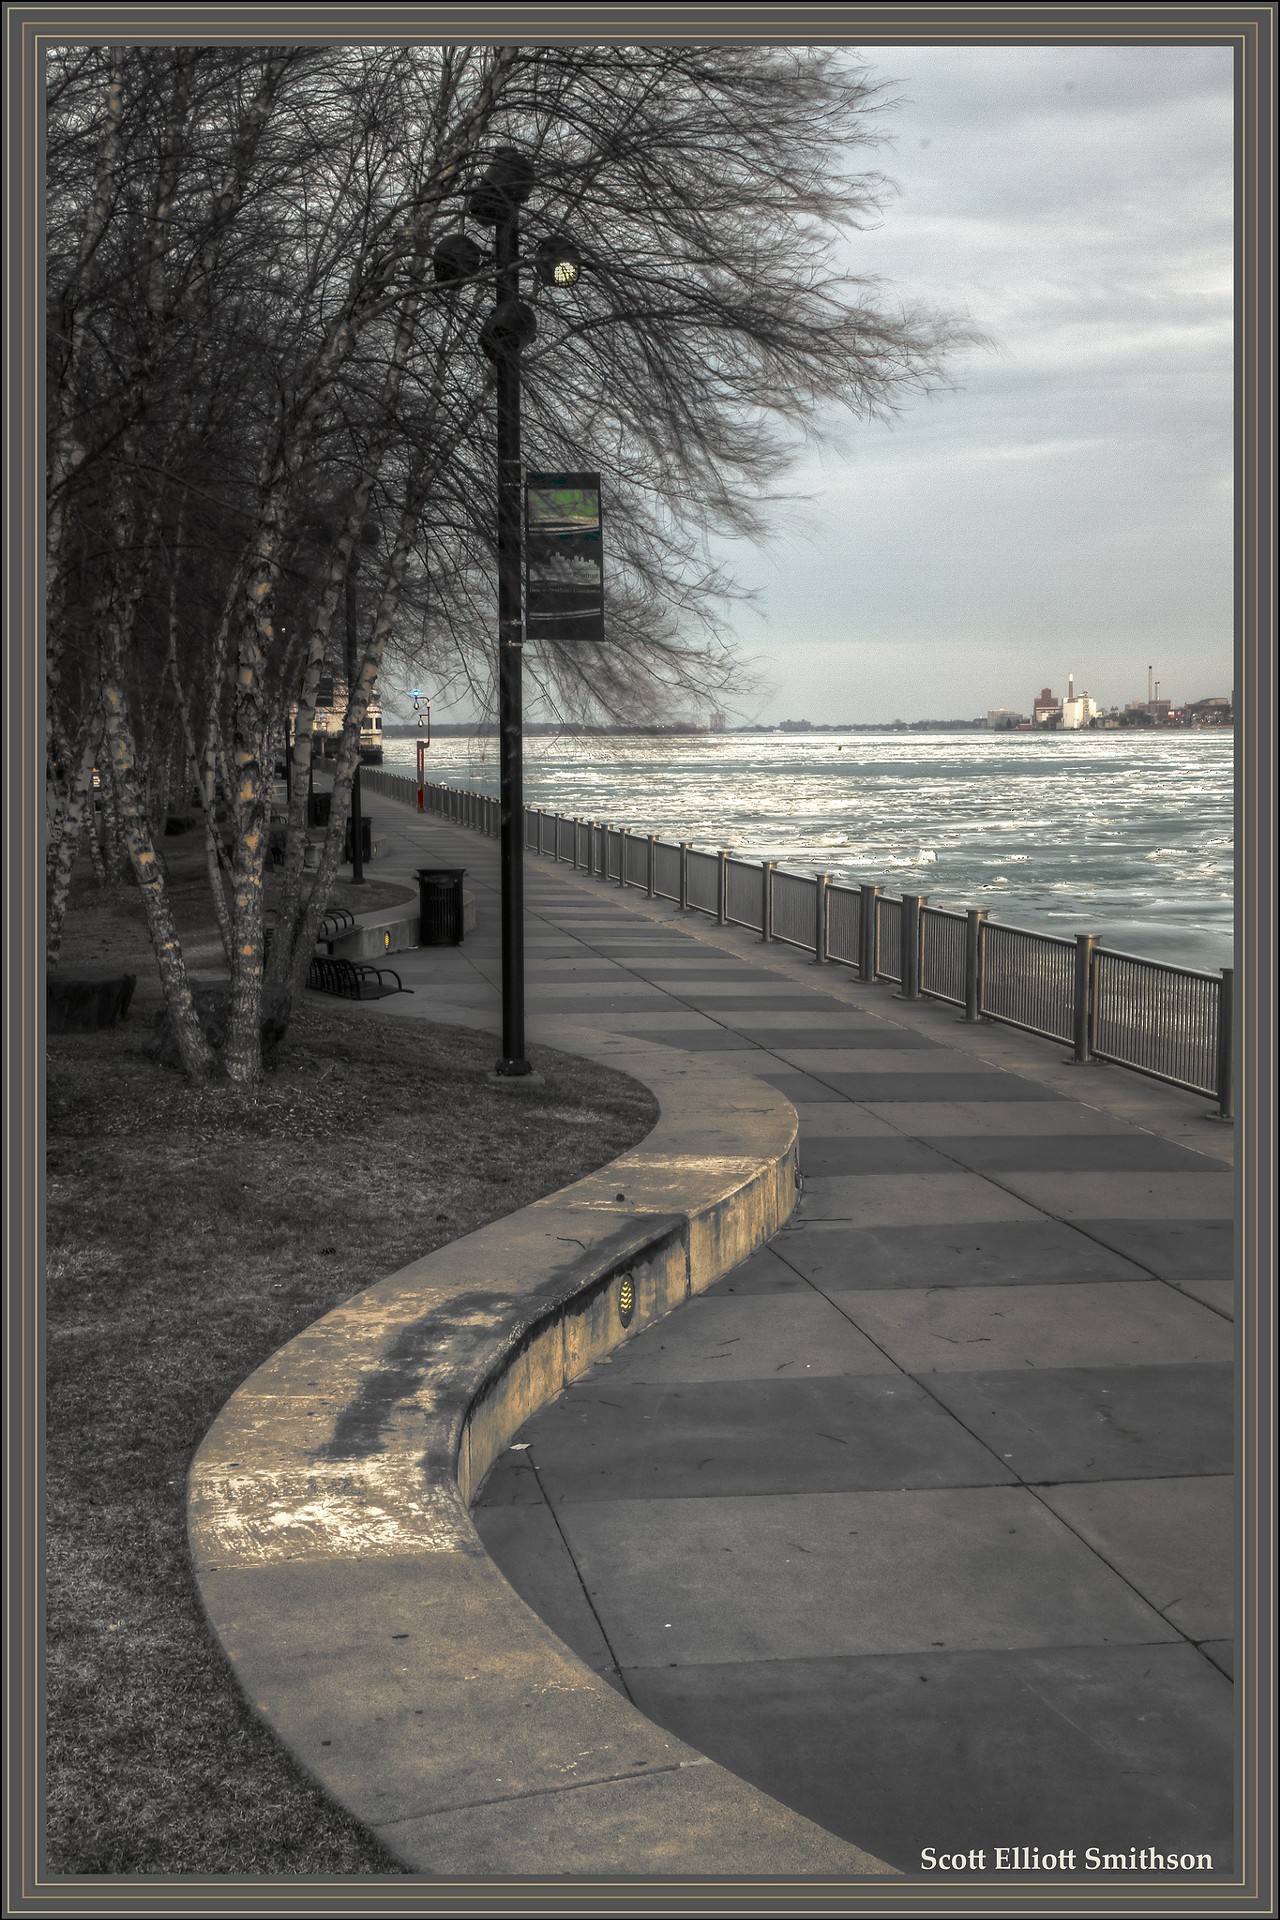 Detroit RiverFront &#149; Sure, the Detroit RiverFront is a pleasure to visit during the summer, but don't forget to take a stroll down this concrete path during a winter afternoon. The view of the Detroit river is simply stunning. Plus, you're close to the Renaissance Center if you need to warm up!